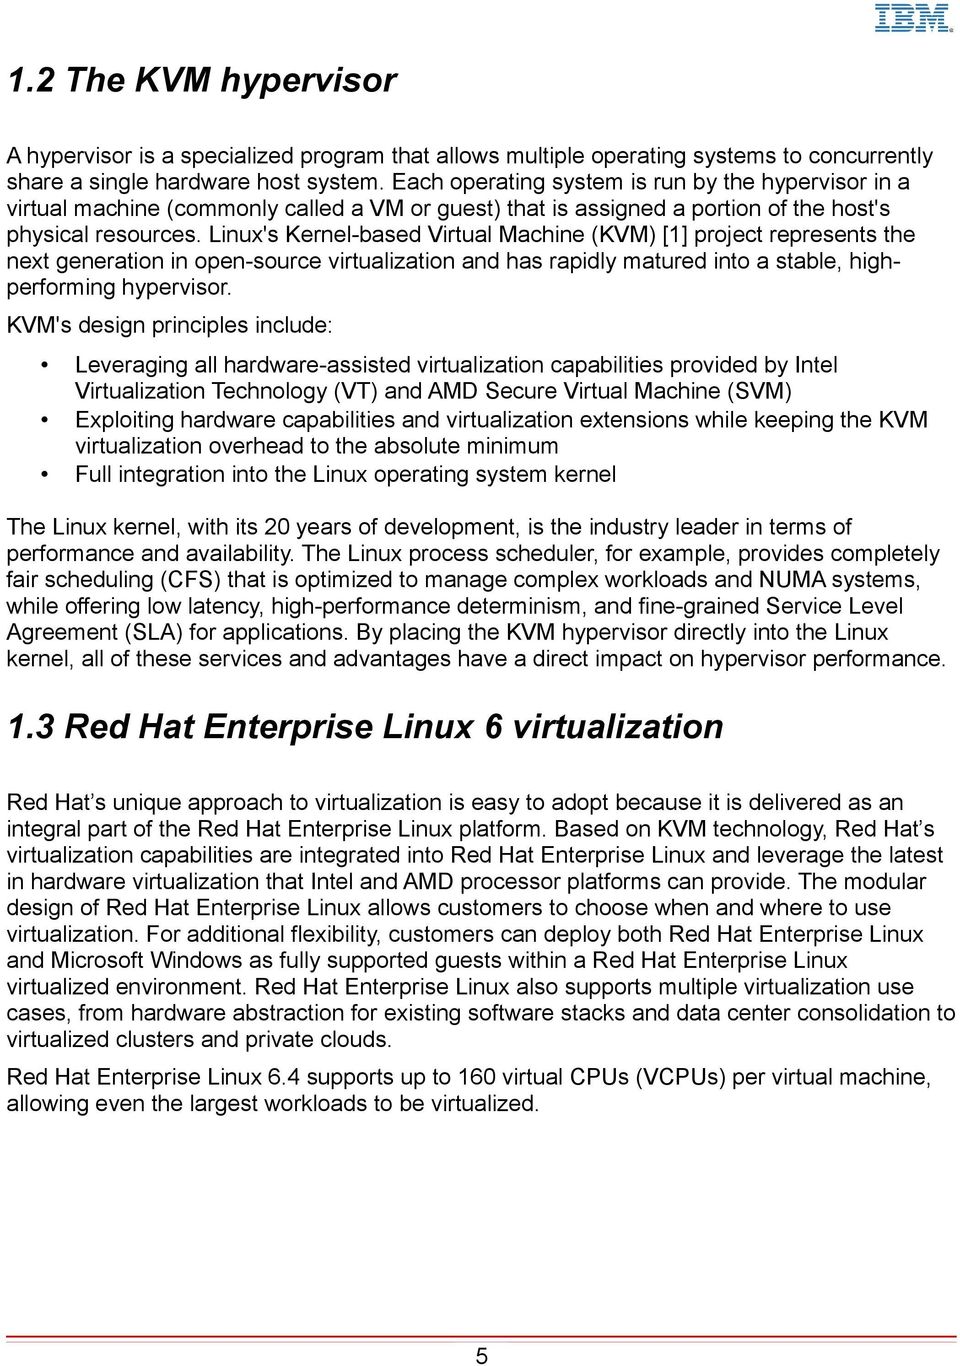 Linux's Kernel-based Virtual Machine (KVM) [1] project represents the next generation in open-source virtualization and has rapidly matured into a stable, highperforming hypervisor.